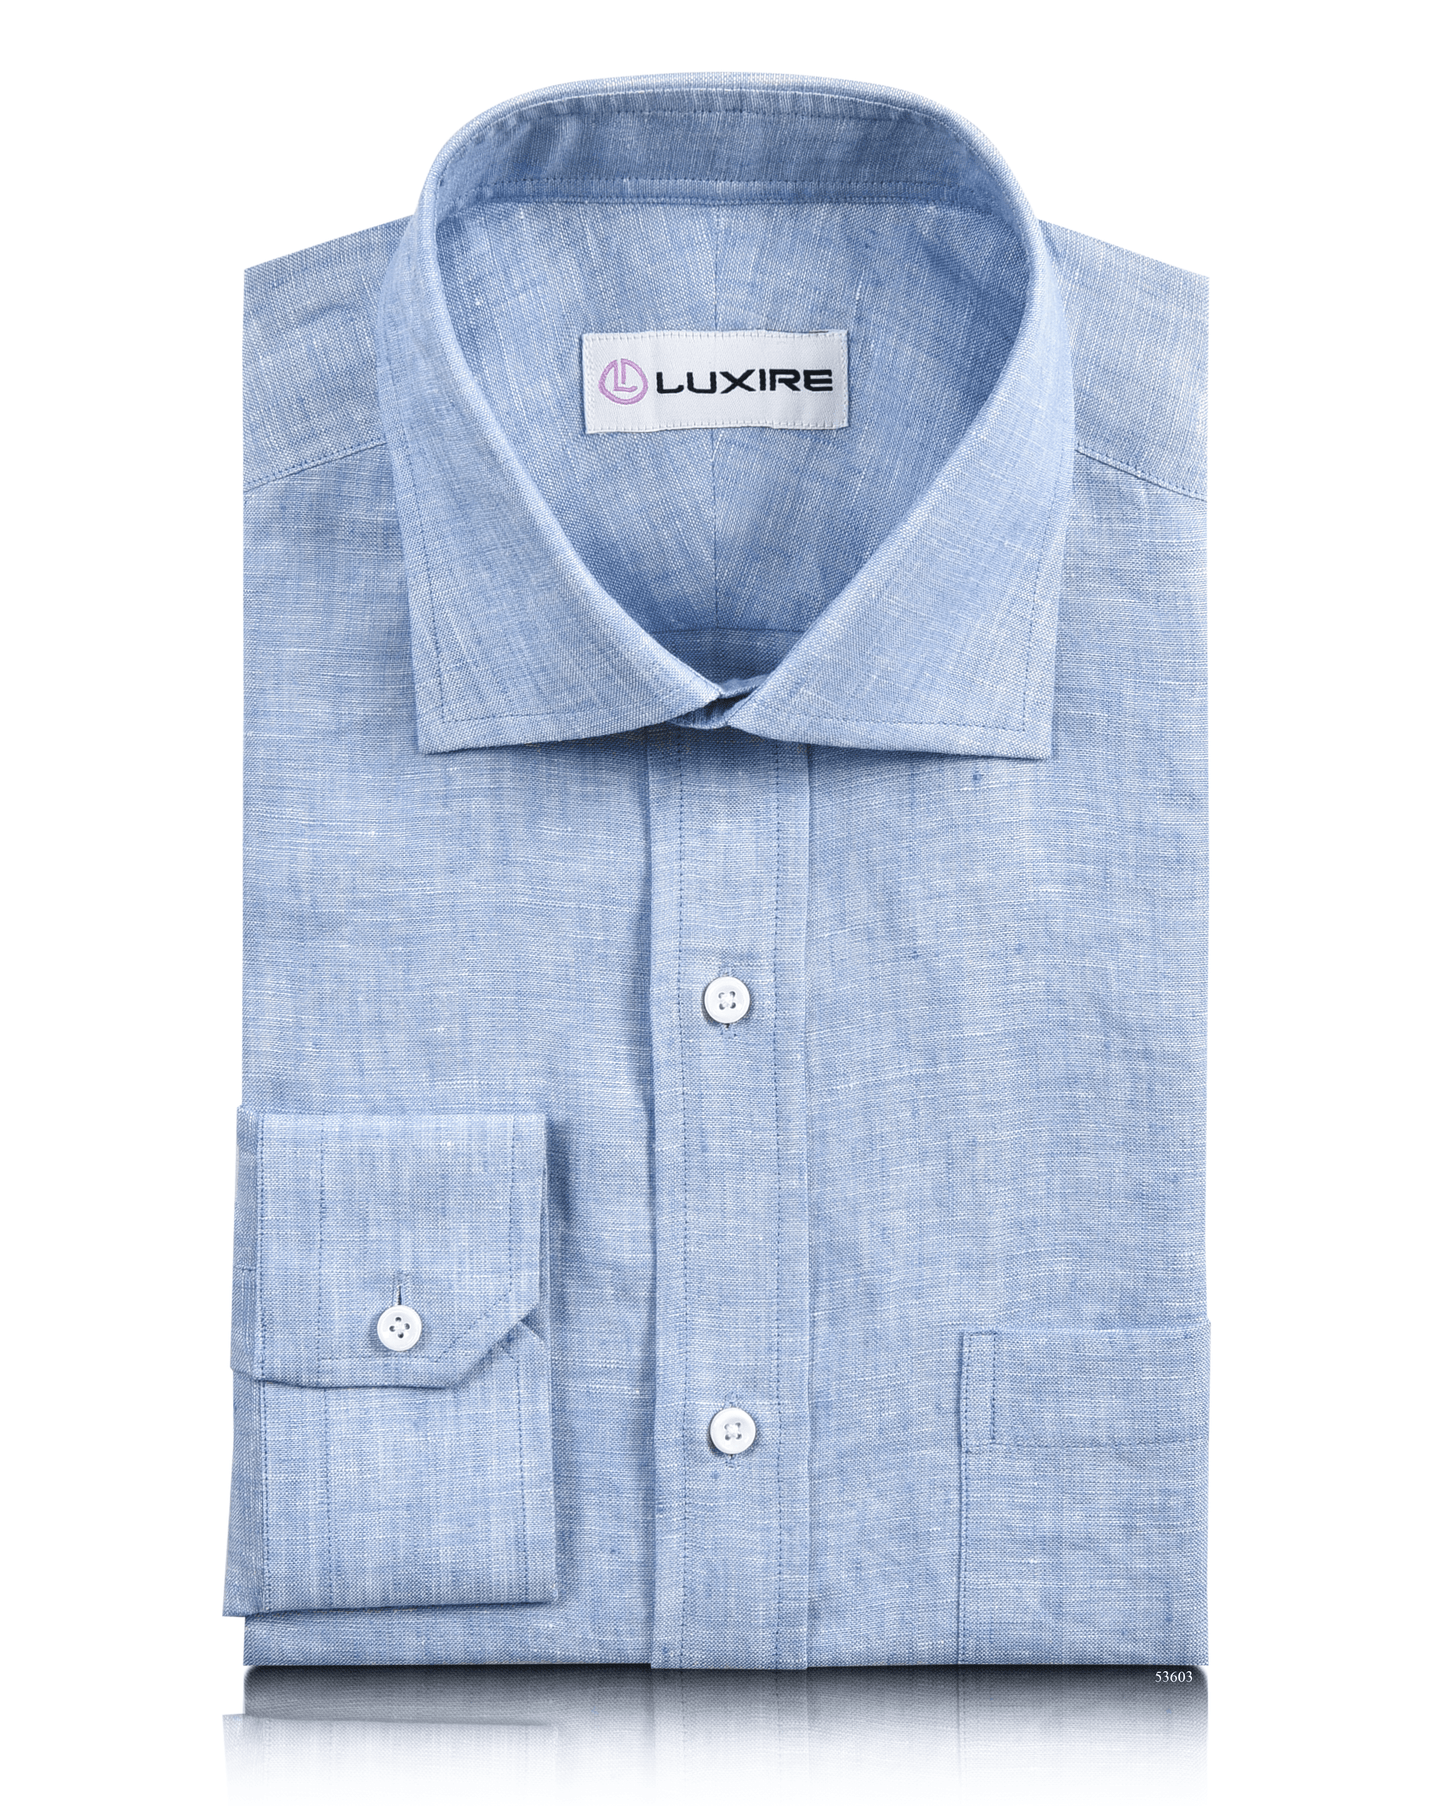 Front of the custom linen shirt for men in light blue chambray by Luxire Clothing